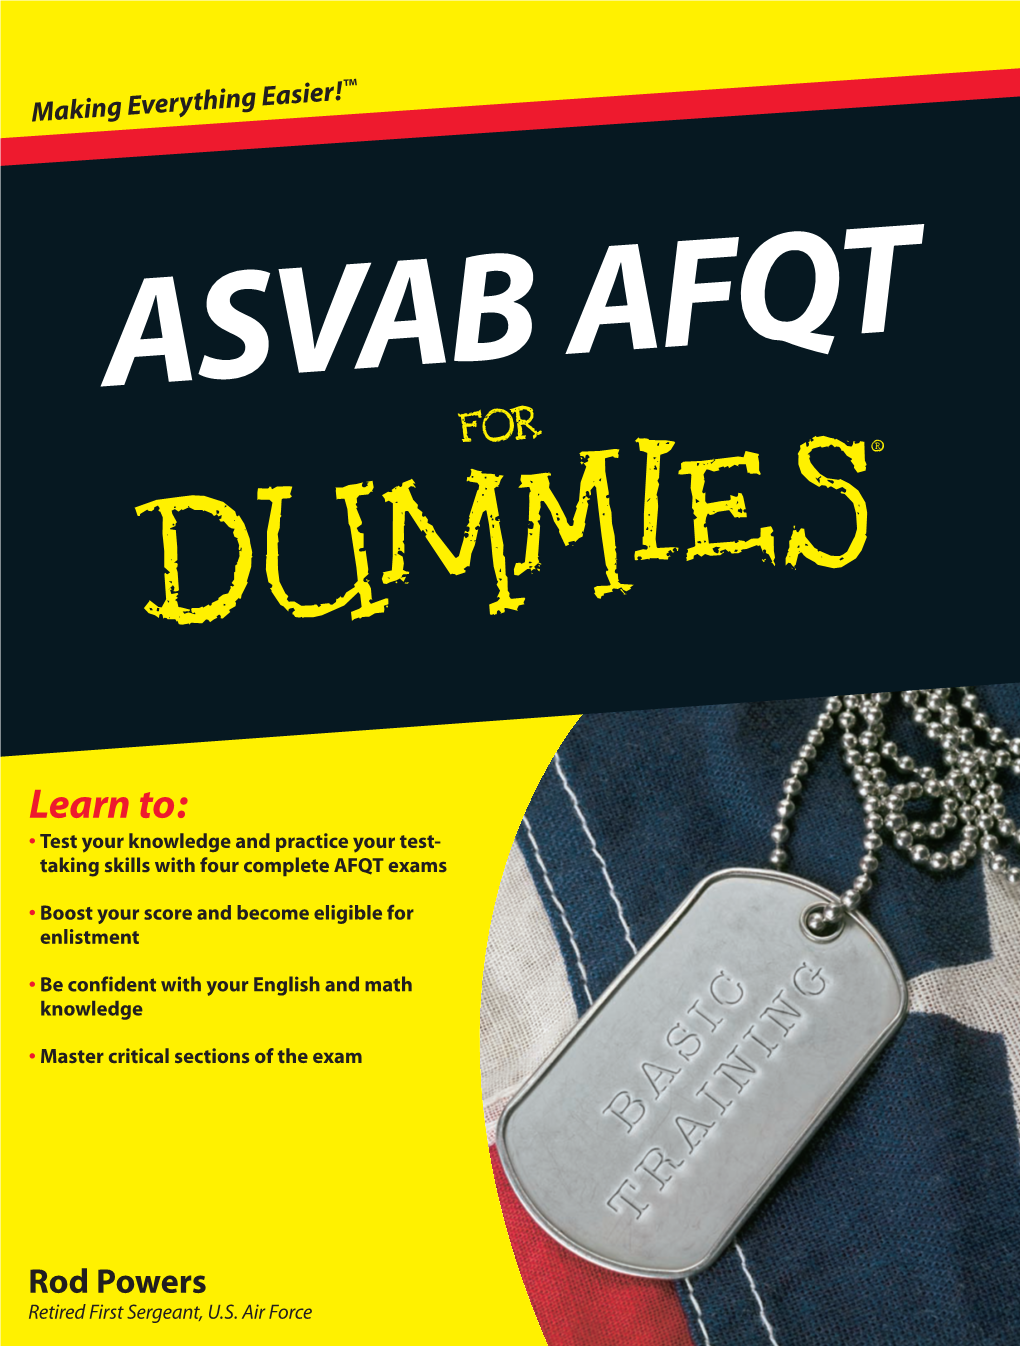 ASVAB AFQT for Dummies® Published by Wiley Publishing, Inc